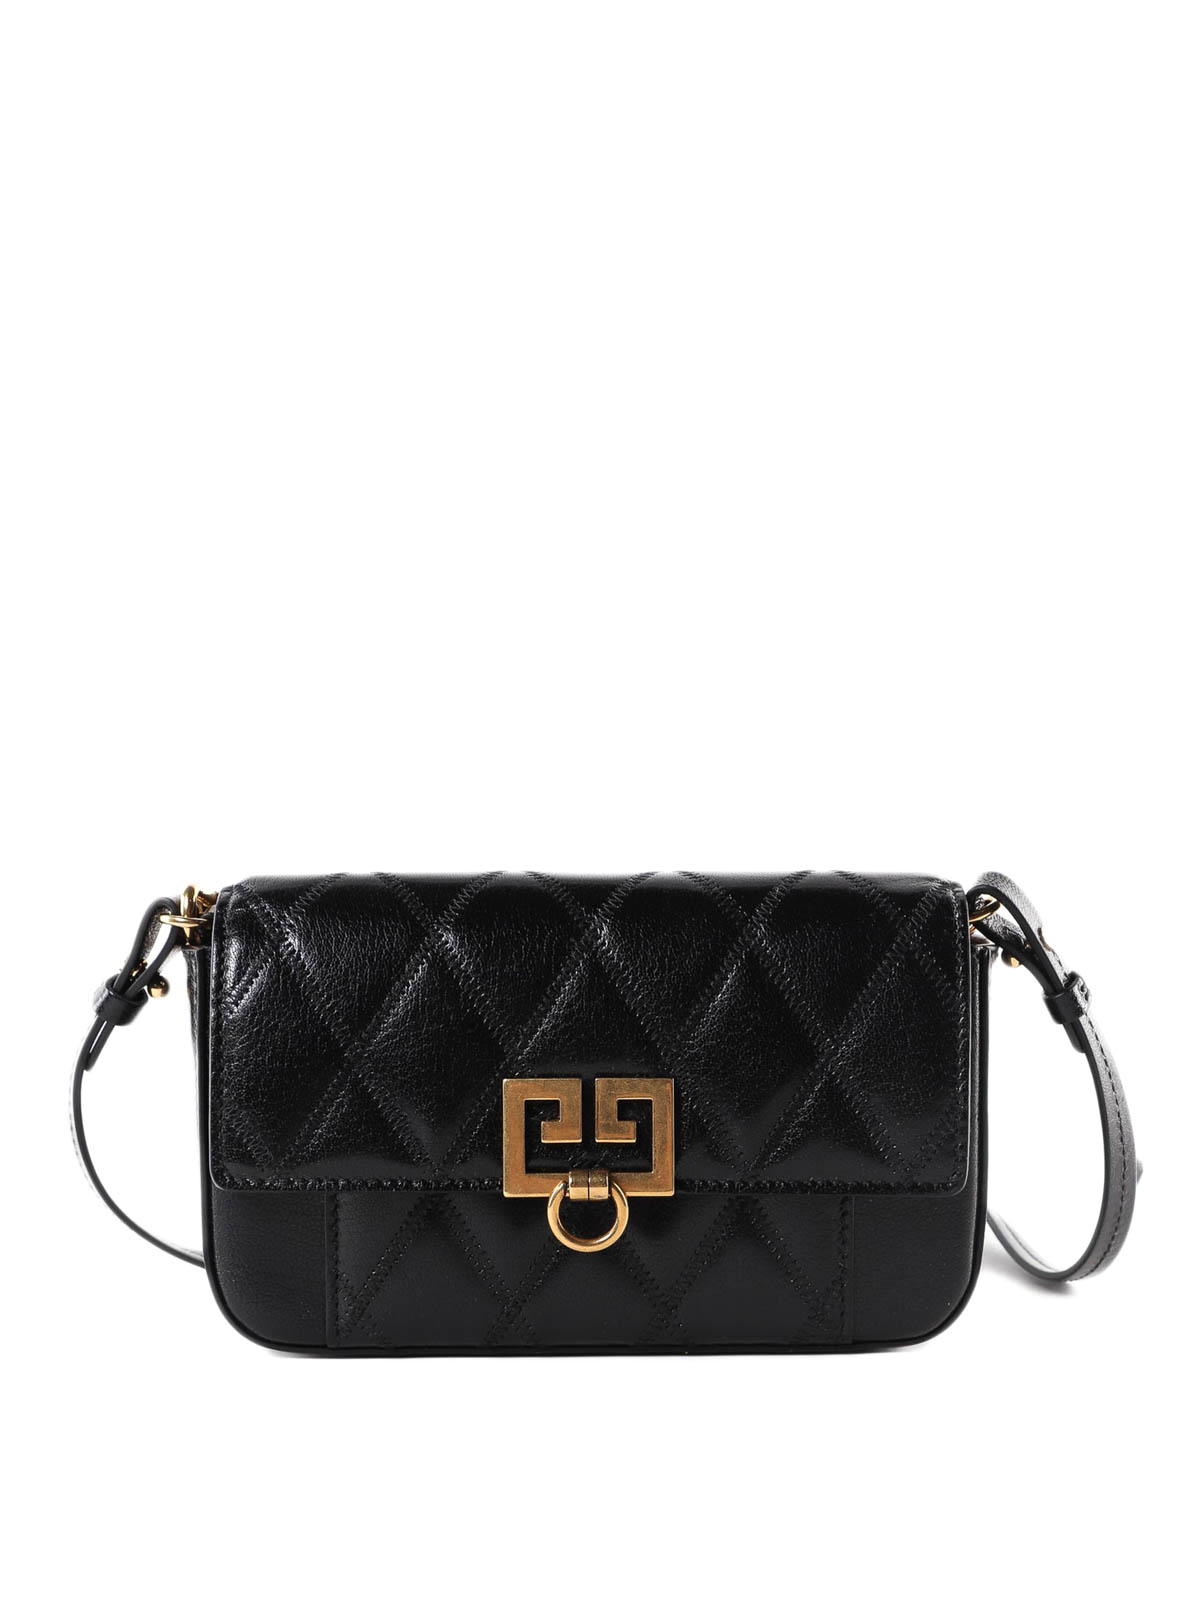 Cross body bags Givenchy - Pocket quilted black leather mini bag -  BB604DB08Z001